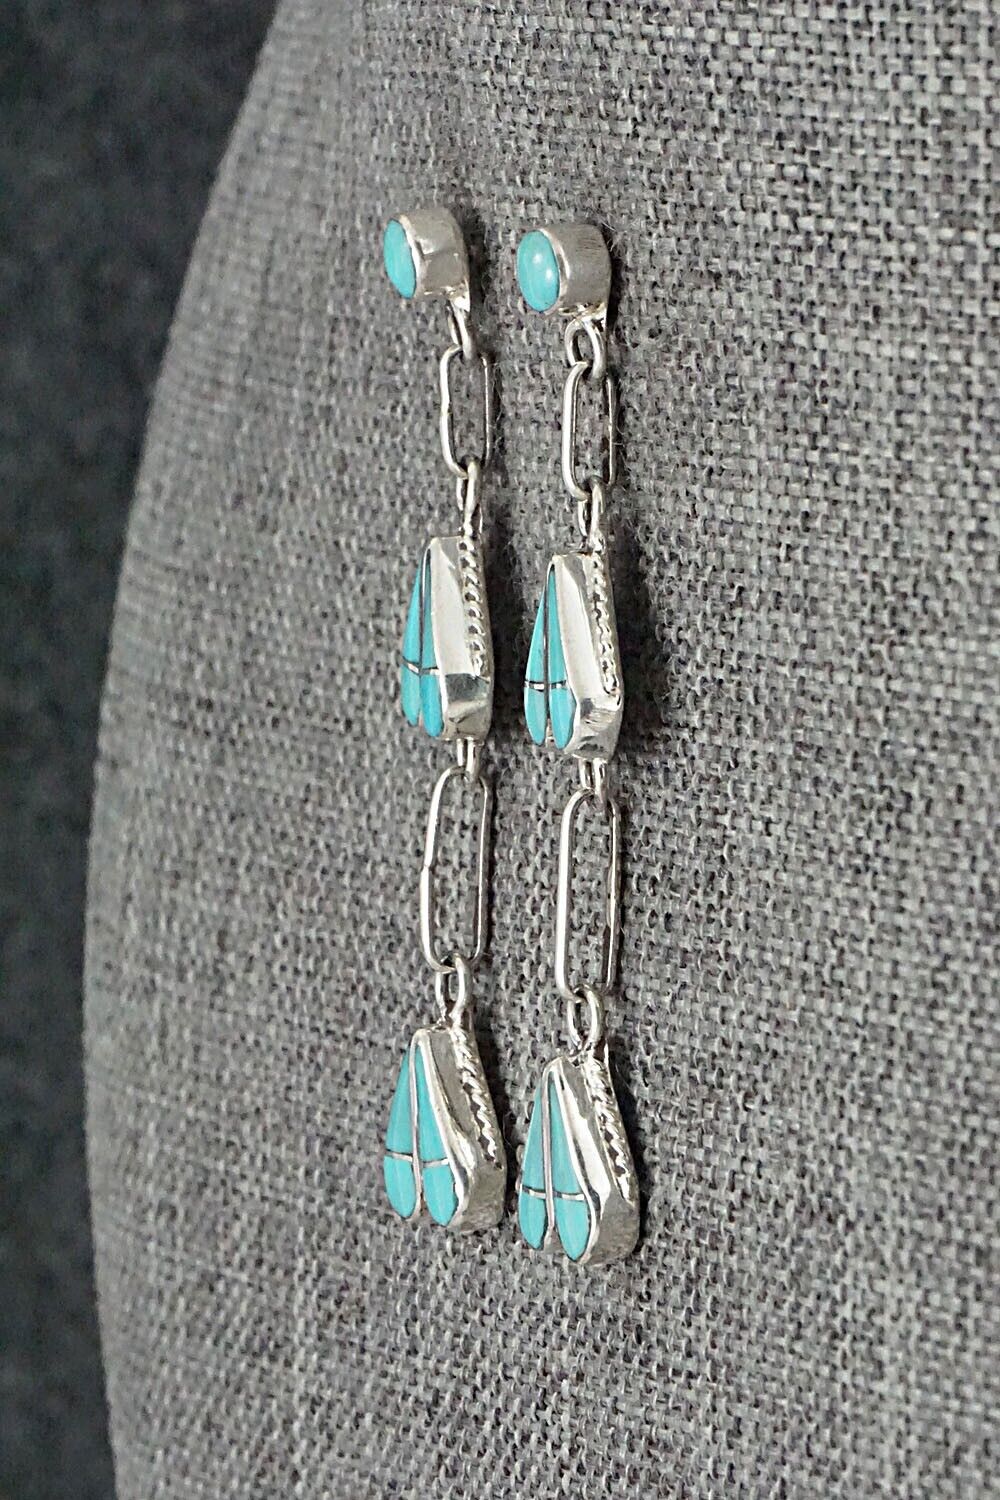 Turquoise and Sterling Silver Earrings - Velda Nastacio